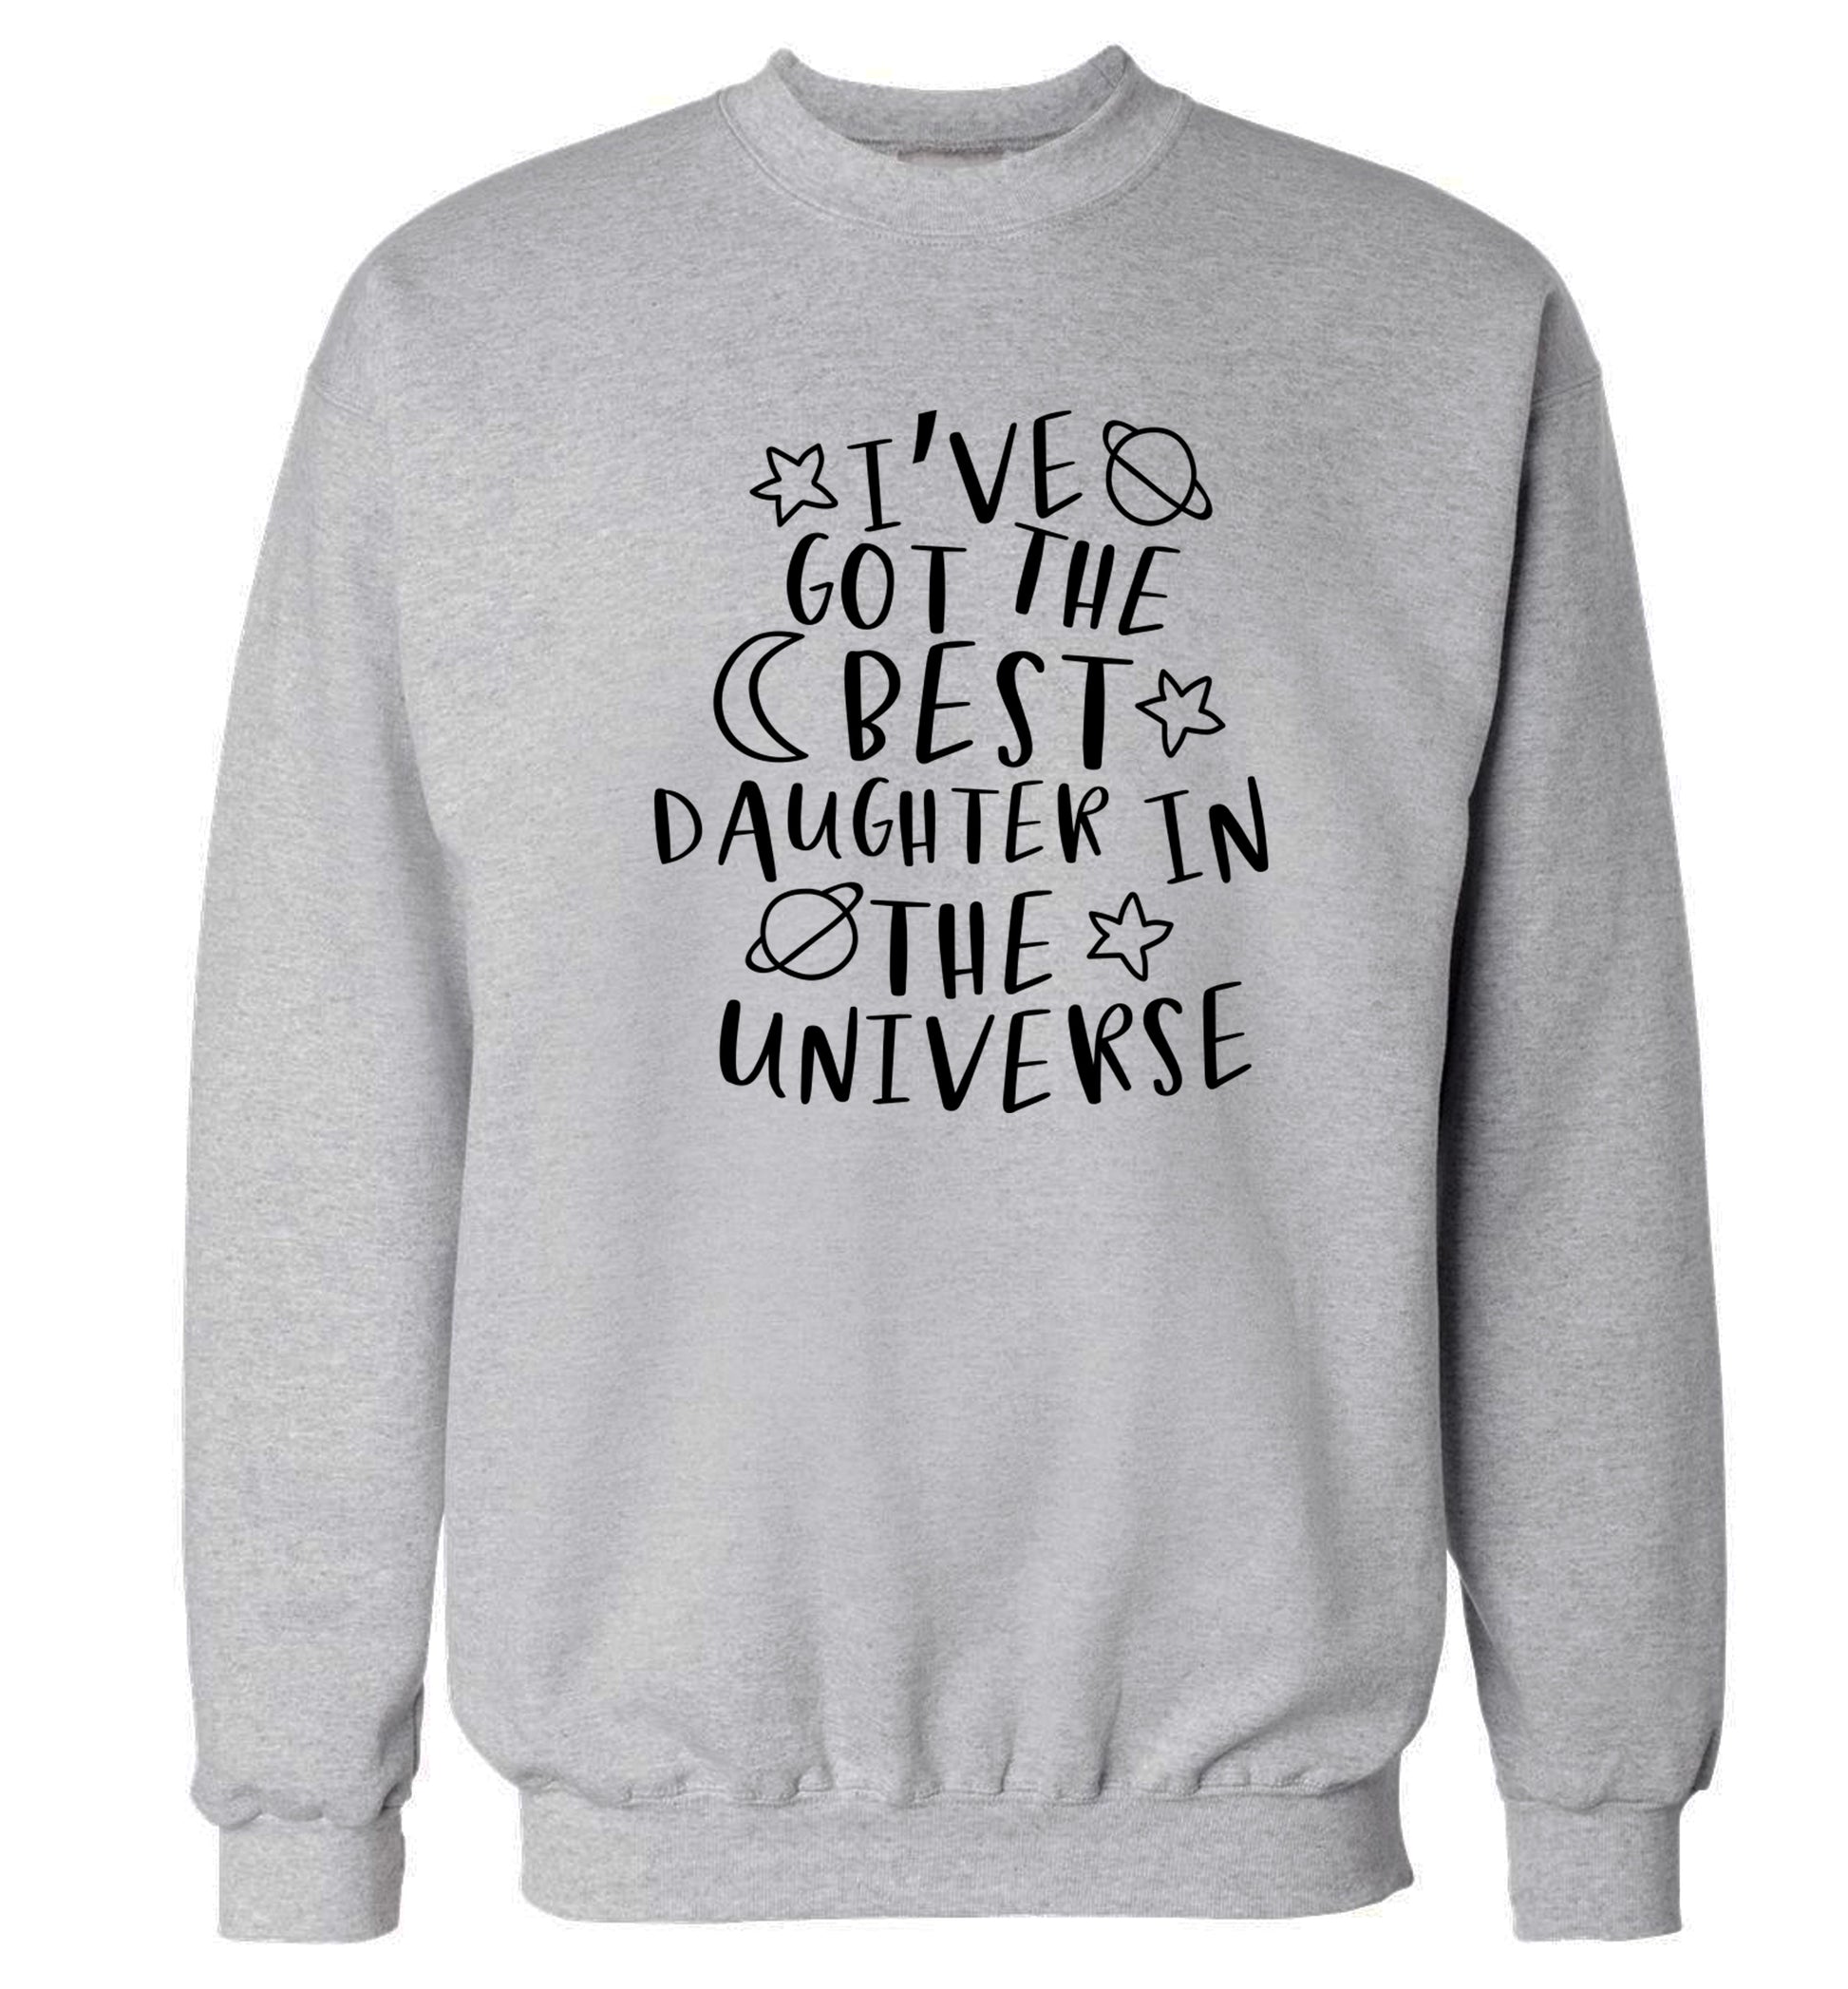 I've got the best daughter in the universe Adult's unisex grey Sweater 2XL